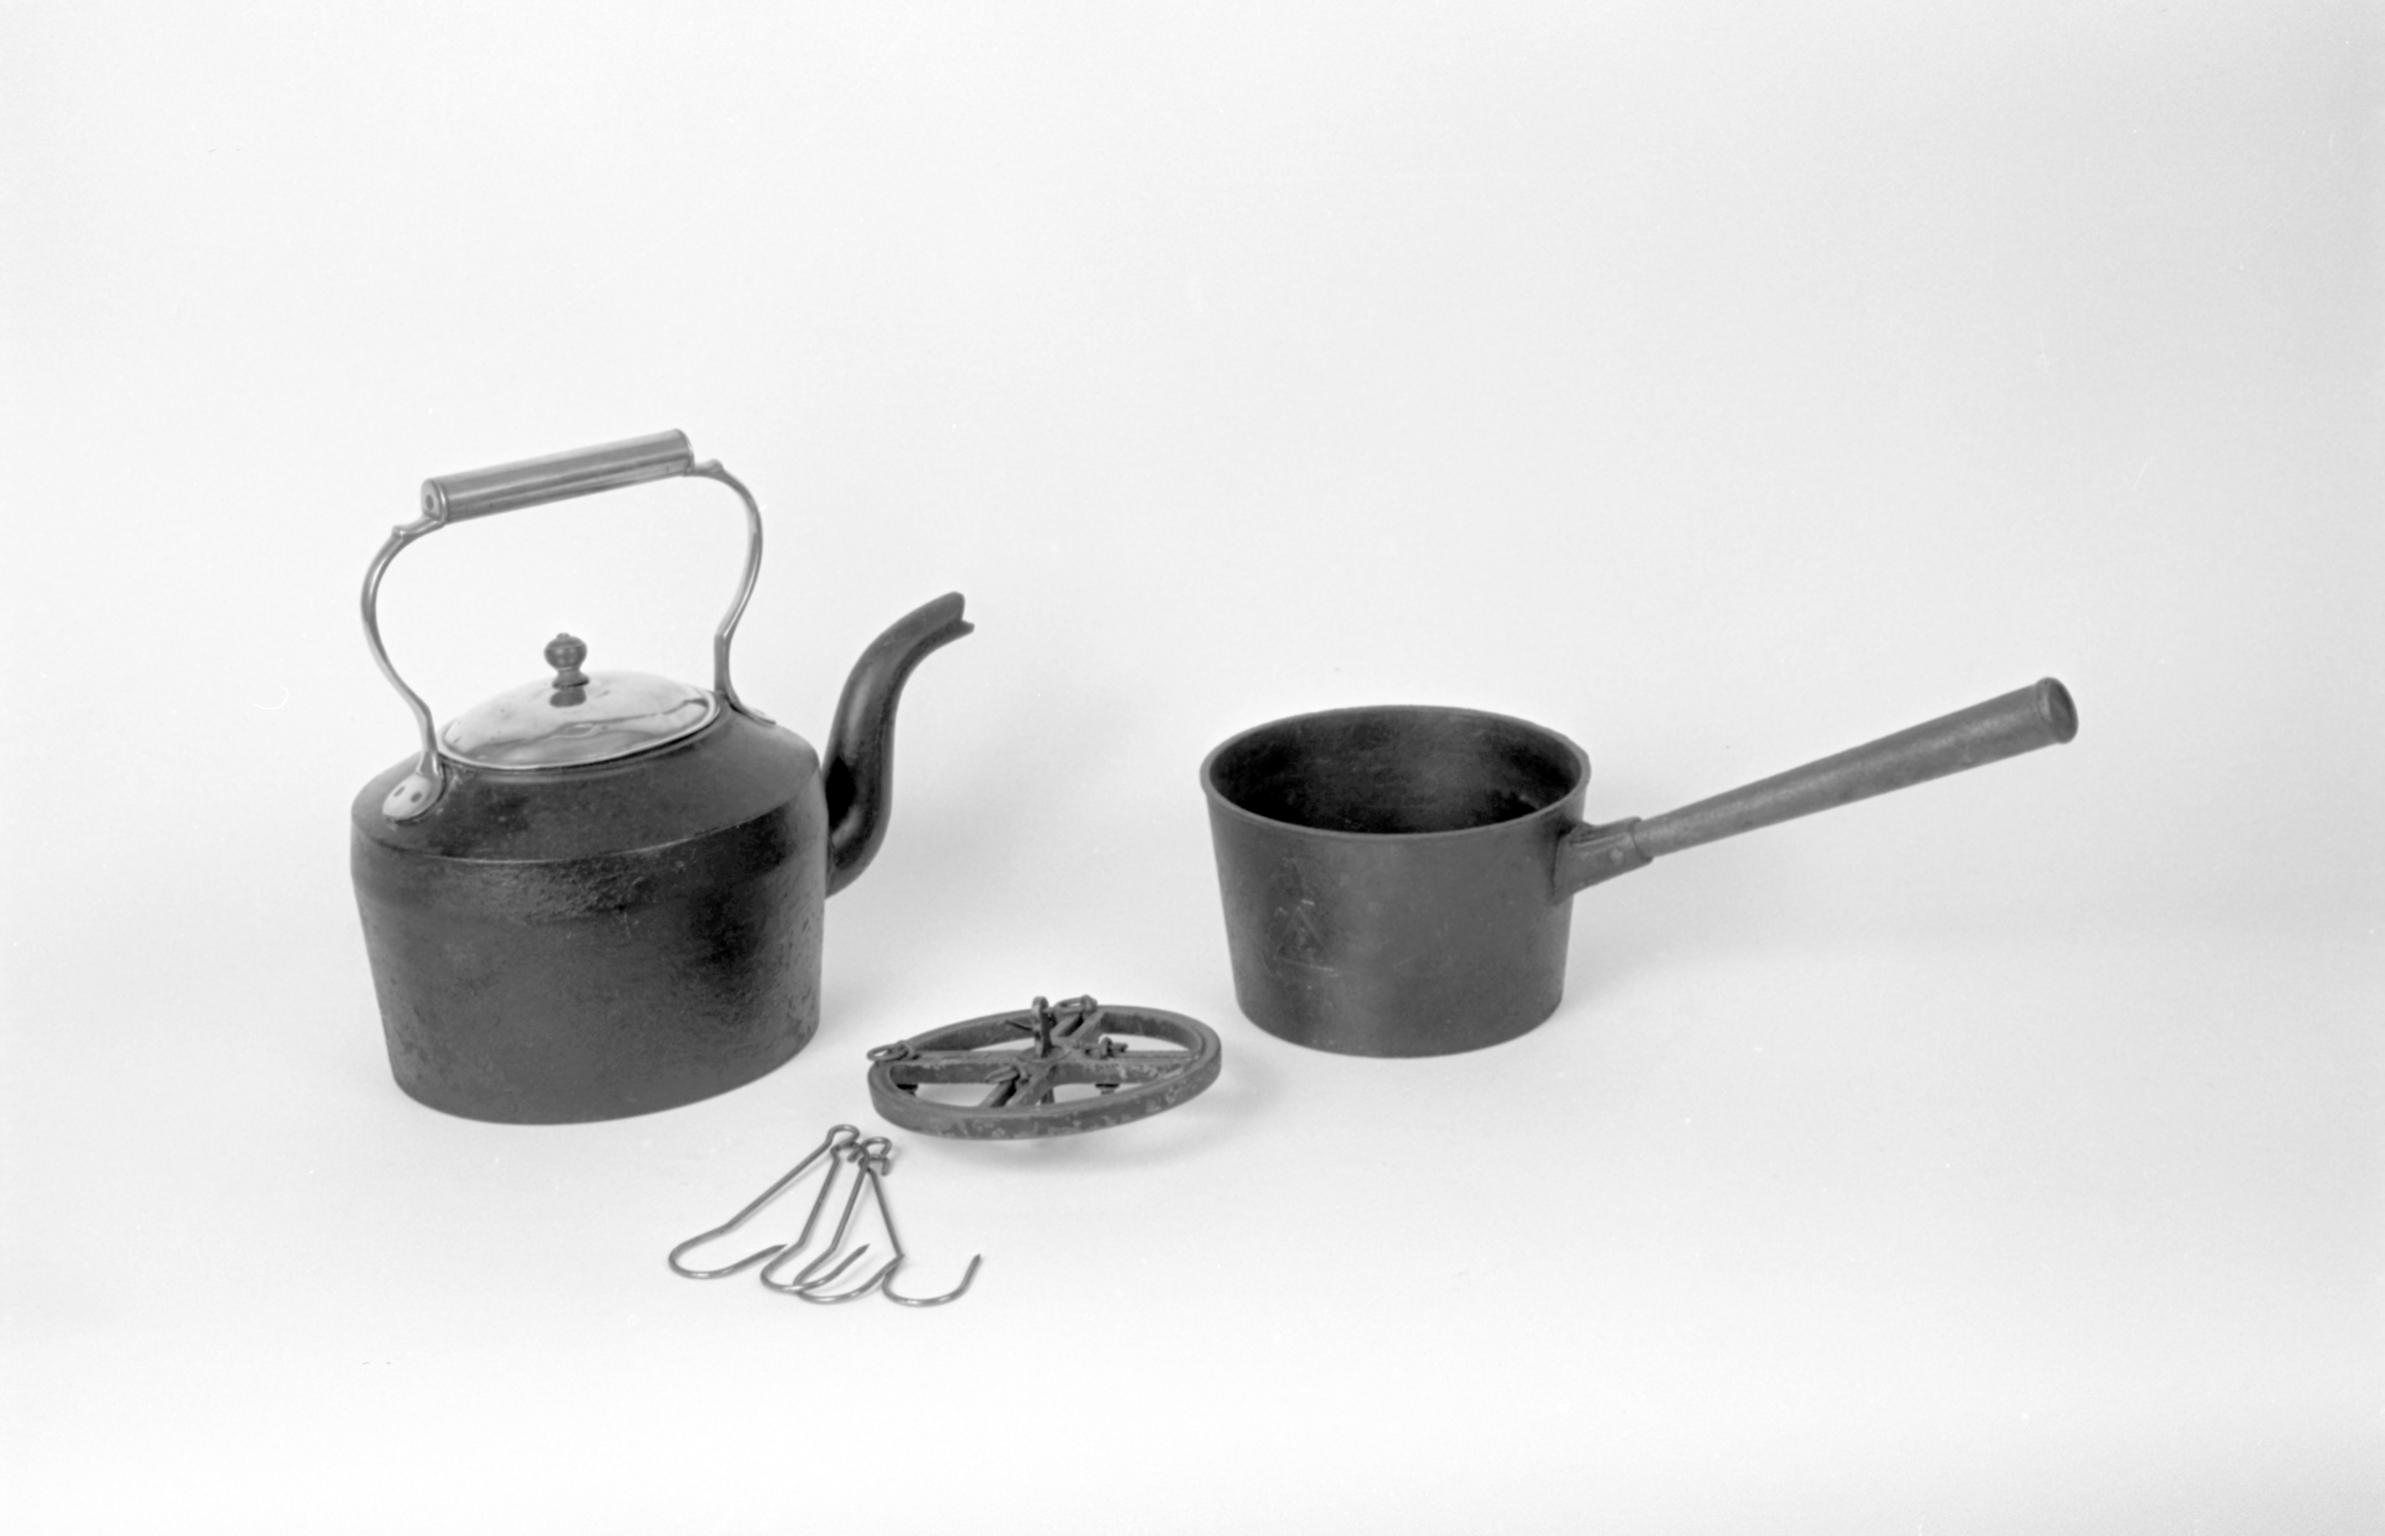 Kettle, Jack and Skillet from SF:NHM Collection